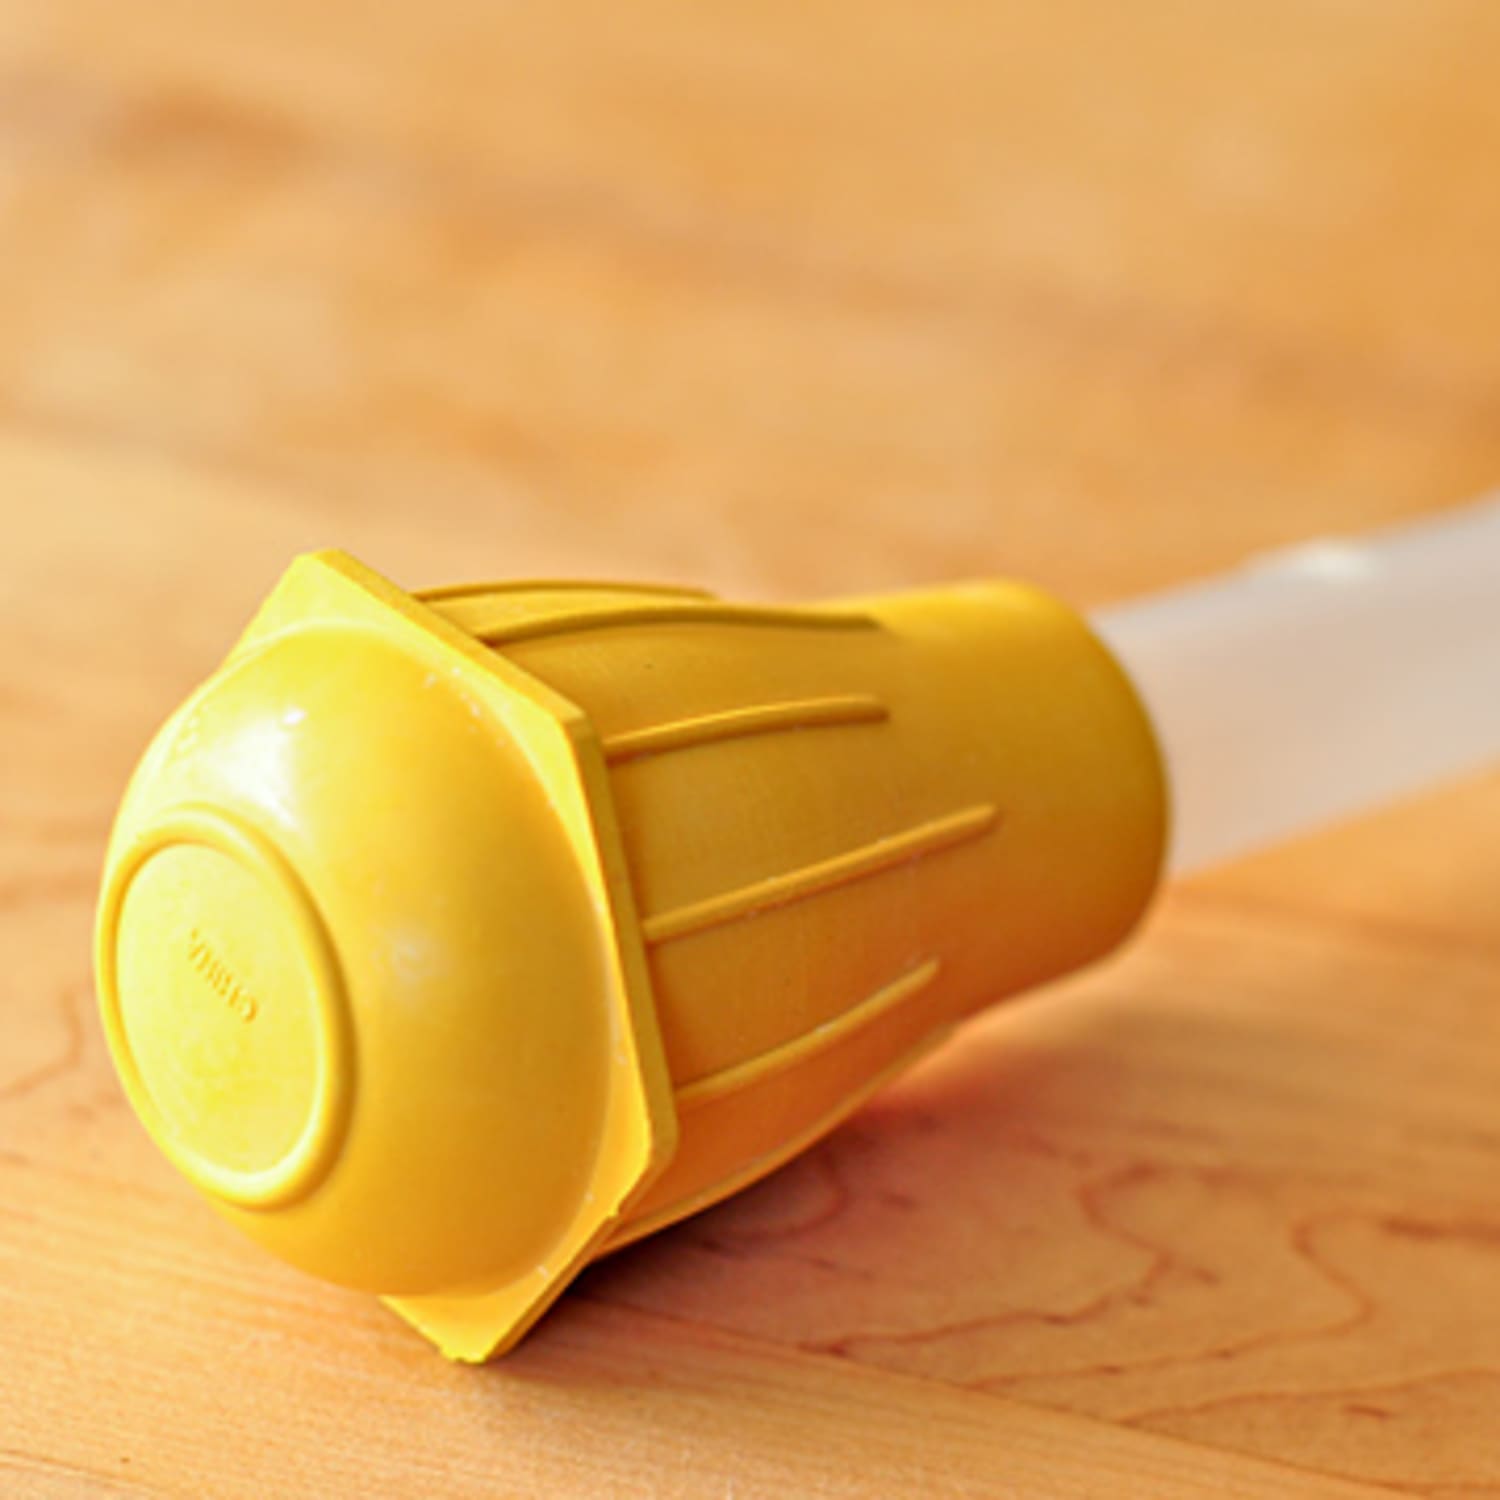 Unexpectedly Useful: 3 Uses for a Turkey Baster